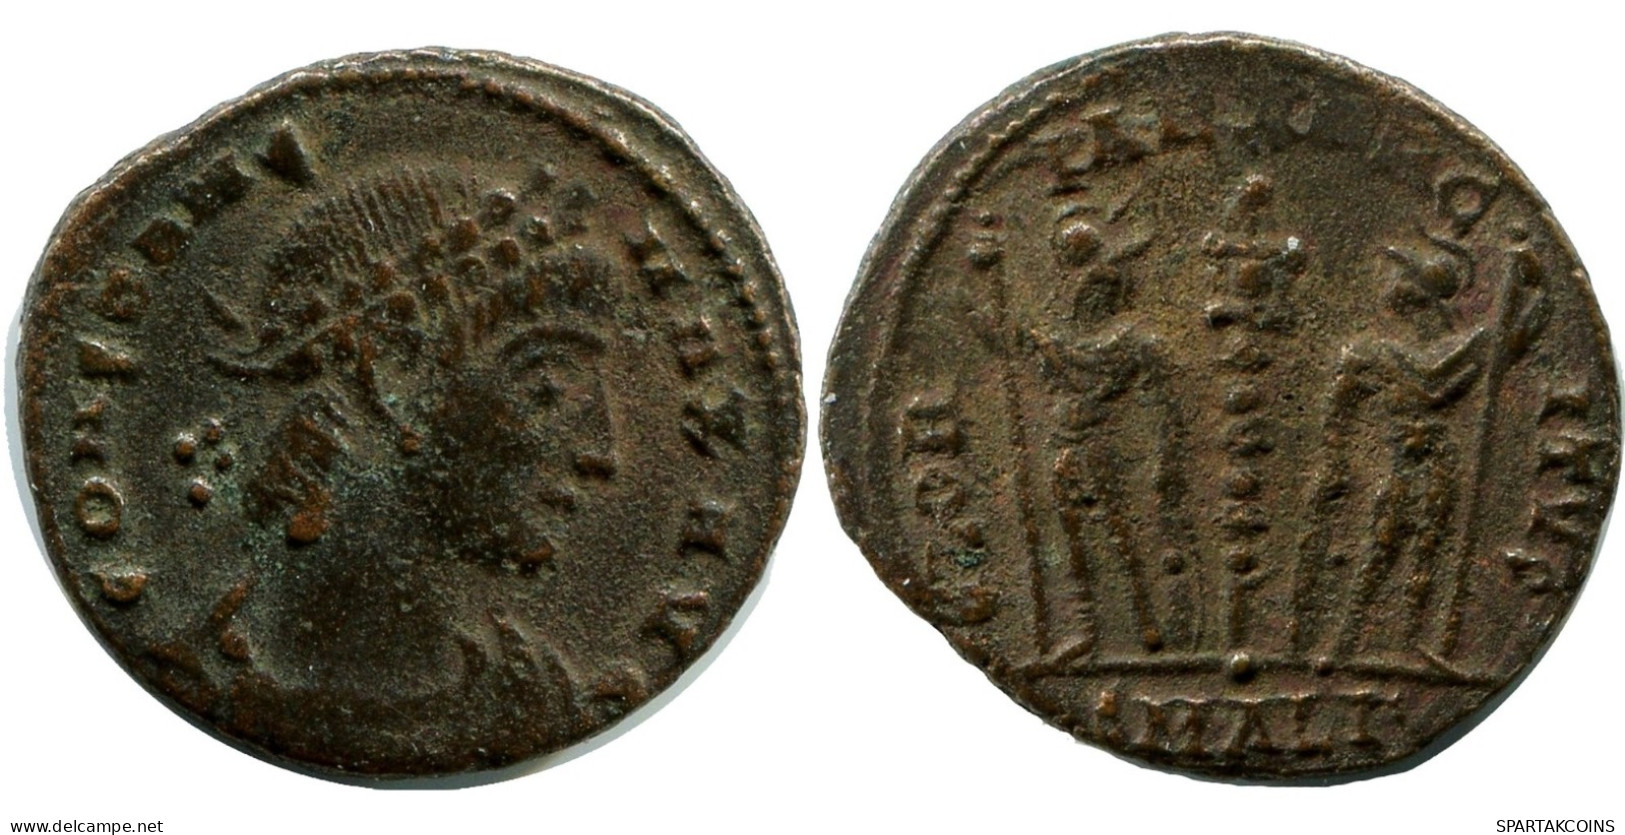 CONSTANS MINTED IN ALEKSANDRIA FROM THE ROYAL ONTARIO MUSEUM #ANC11430.14.D.A - Der Christlischen Kaiser (307 / 363)